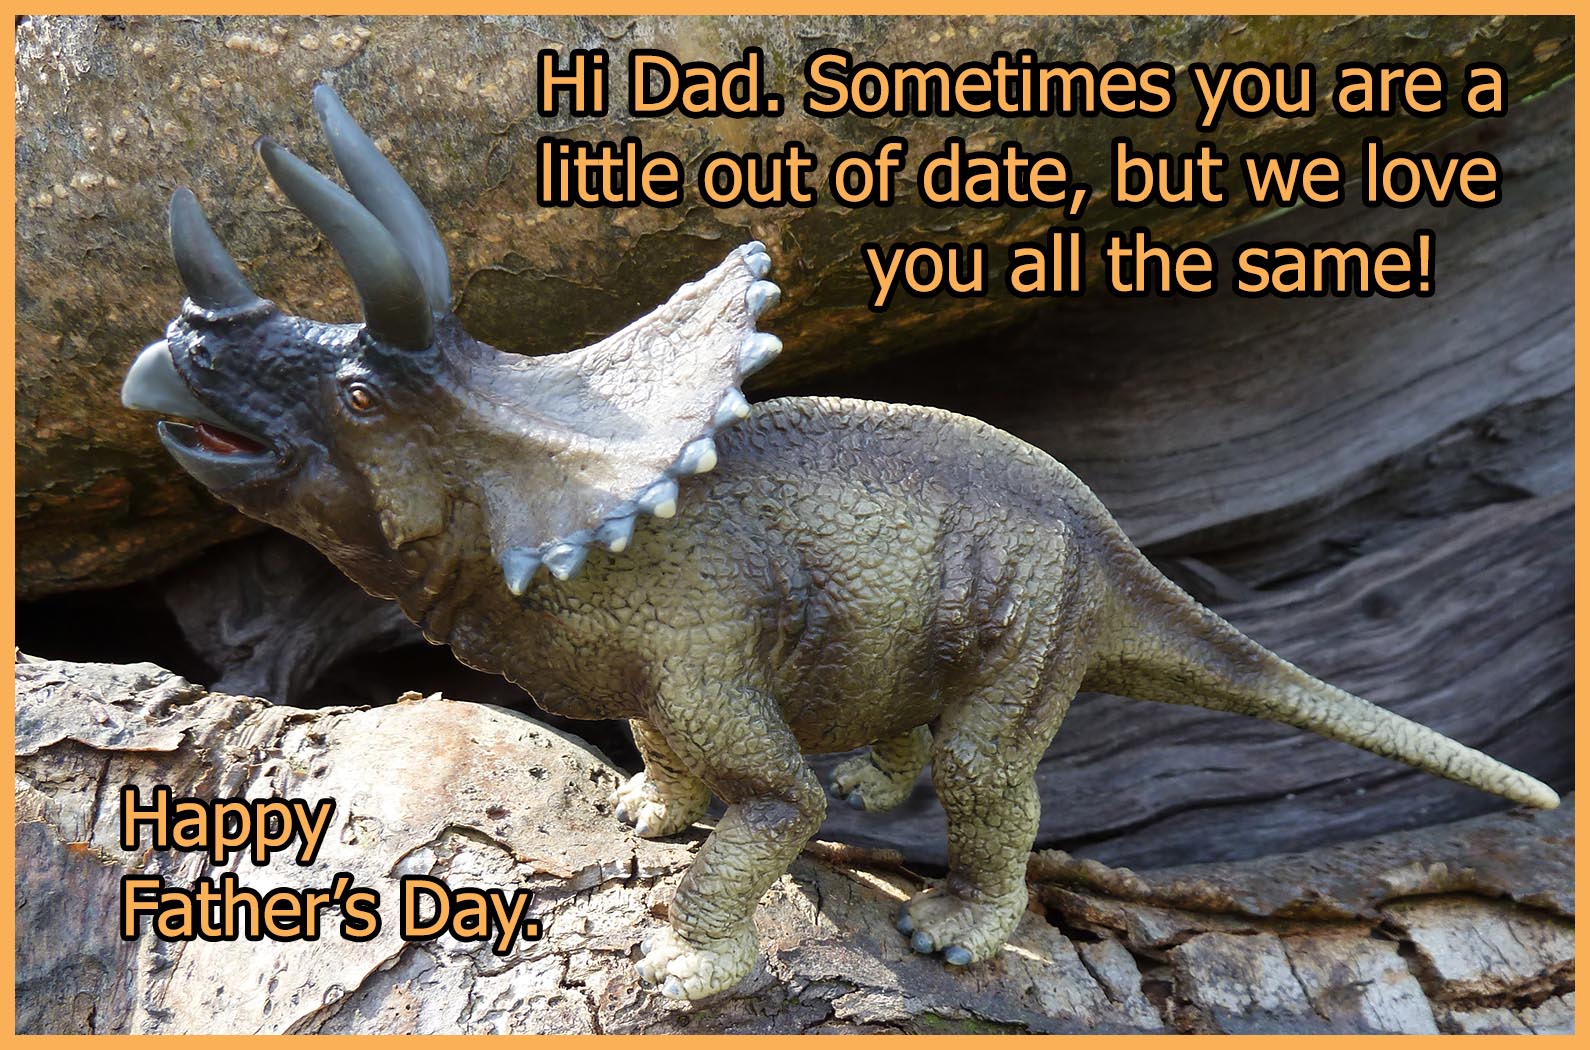 dinosaur greeting card for father's day